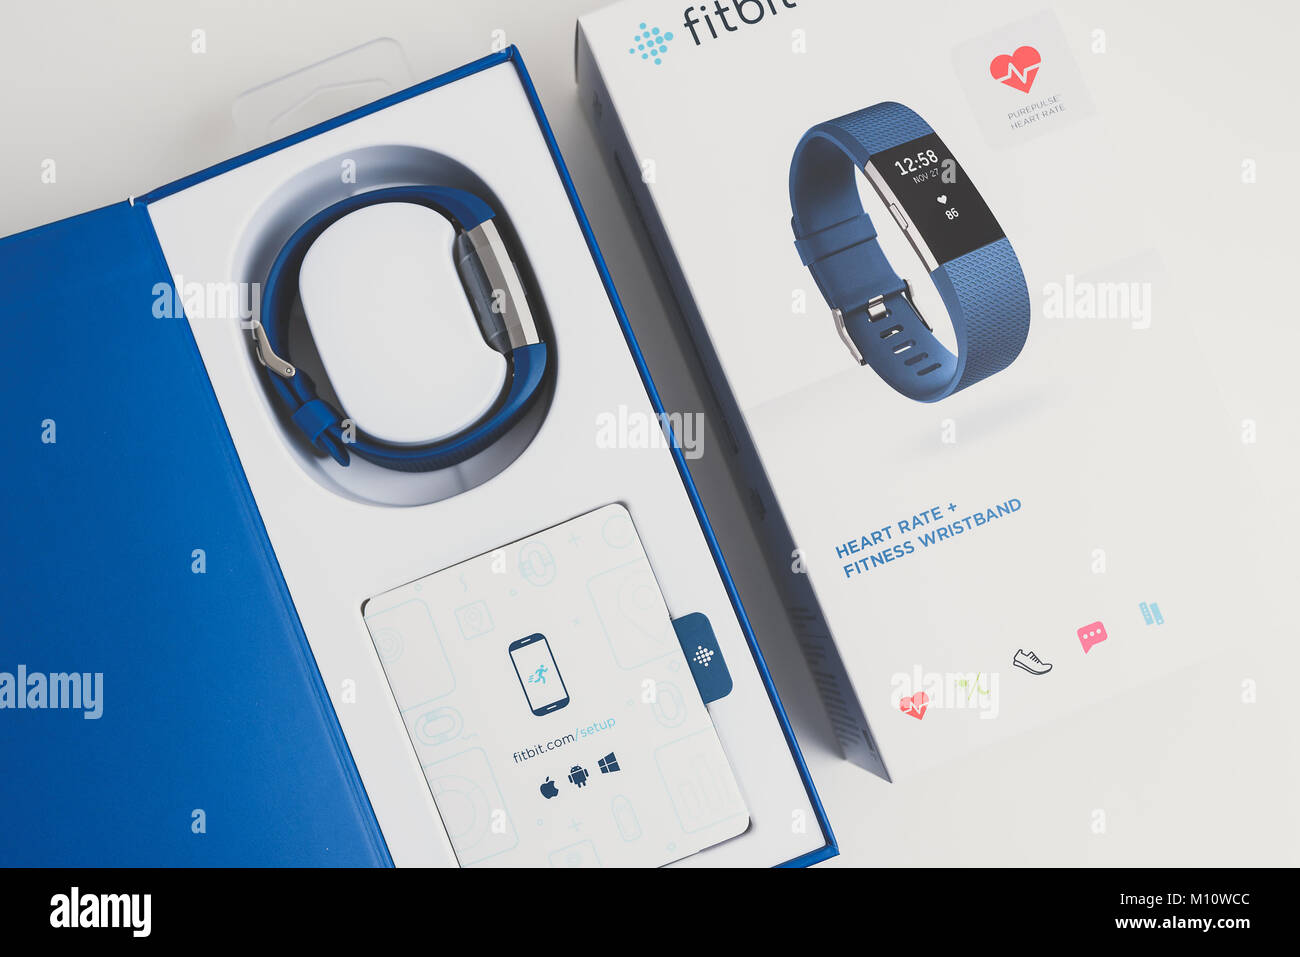 Fitbit Charge 2 High Resolution Stock Photography and Images - Alamy